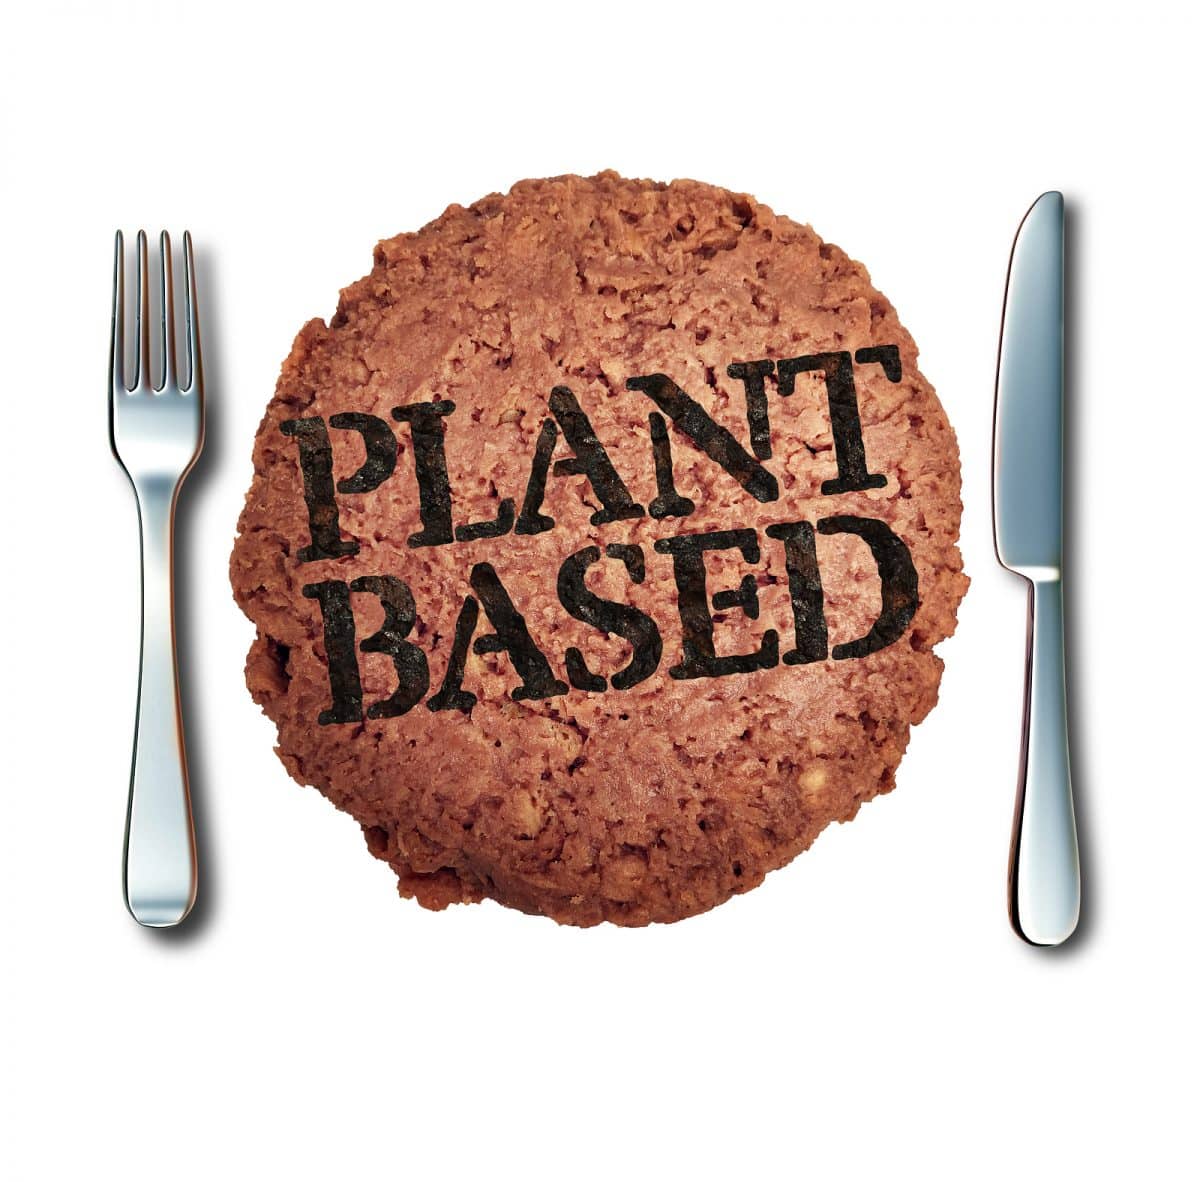 Plant based meat